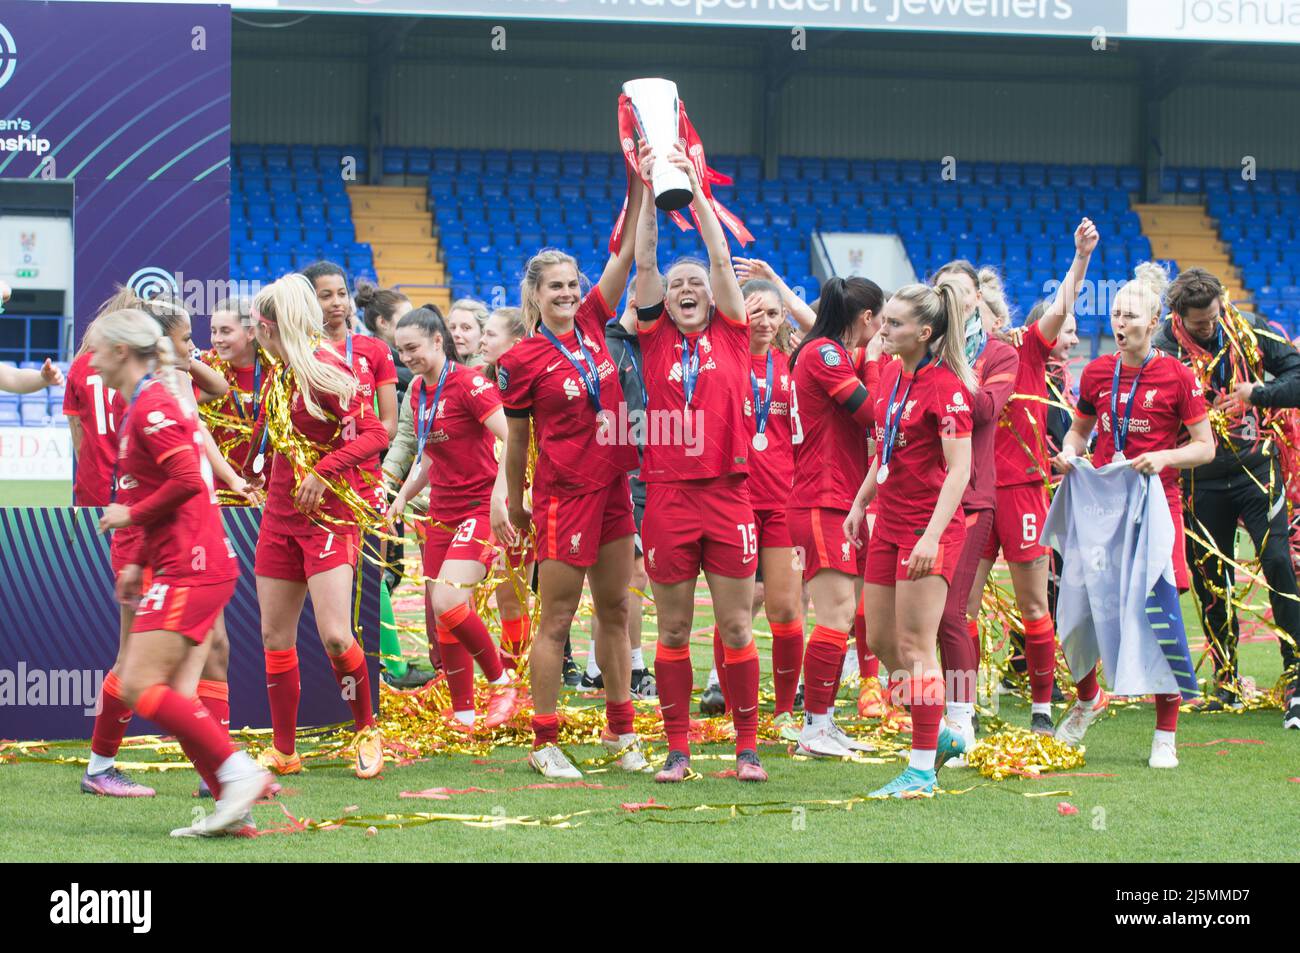 Birkenhead, UK. 24th Apr, 2022. Liverpool team celebrate with trophy after winning the FA Women's Championship 2021-22 after winning the Womens Championship football match between Liverpool and Sheffield United 6-1 at Prenton Park in Birkenhead, England. Terry Scott/SPP Credit: SPP Sport Press Photo. /Alamy Live News Stock Photo